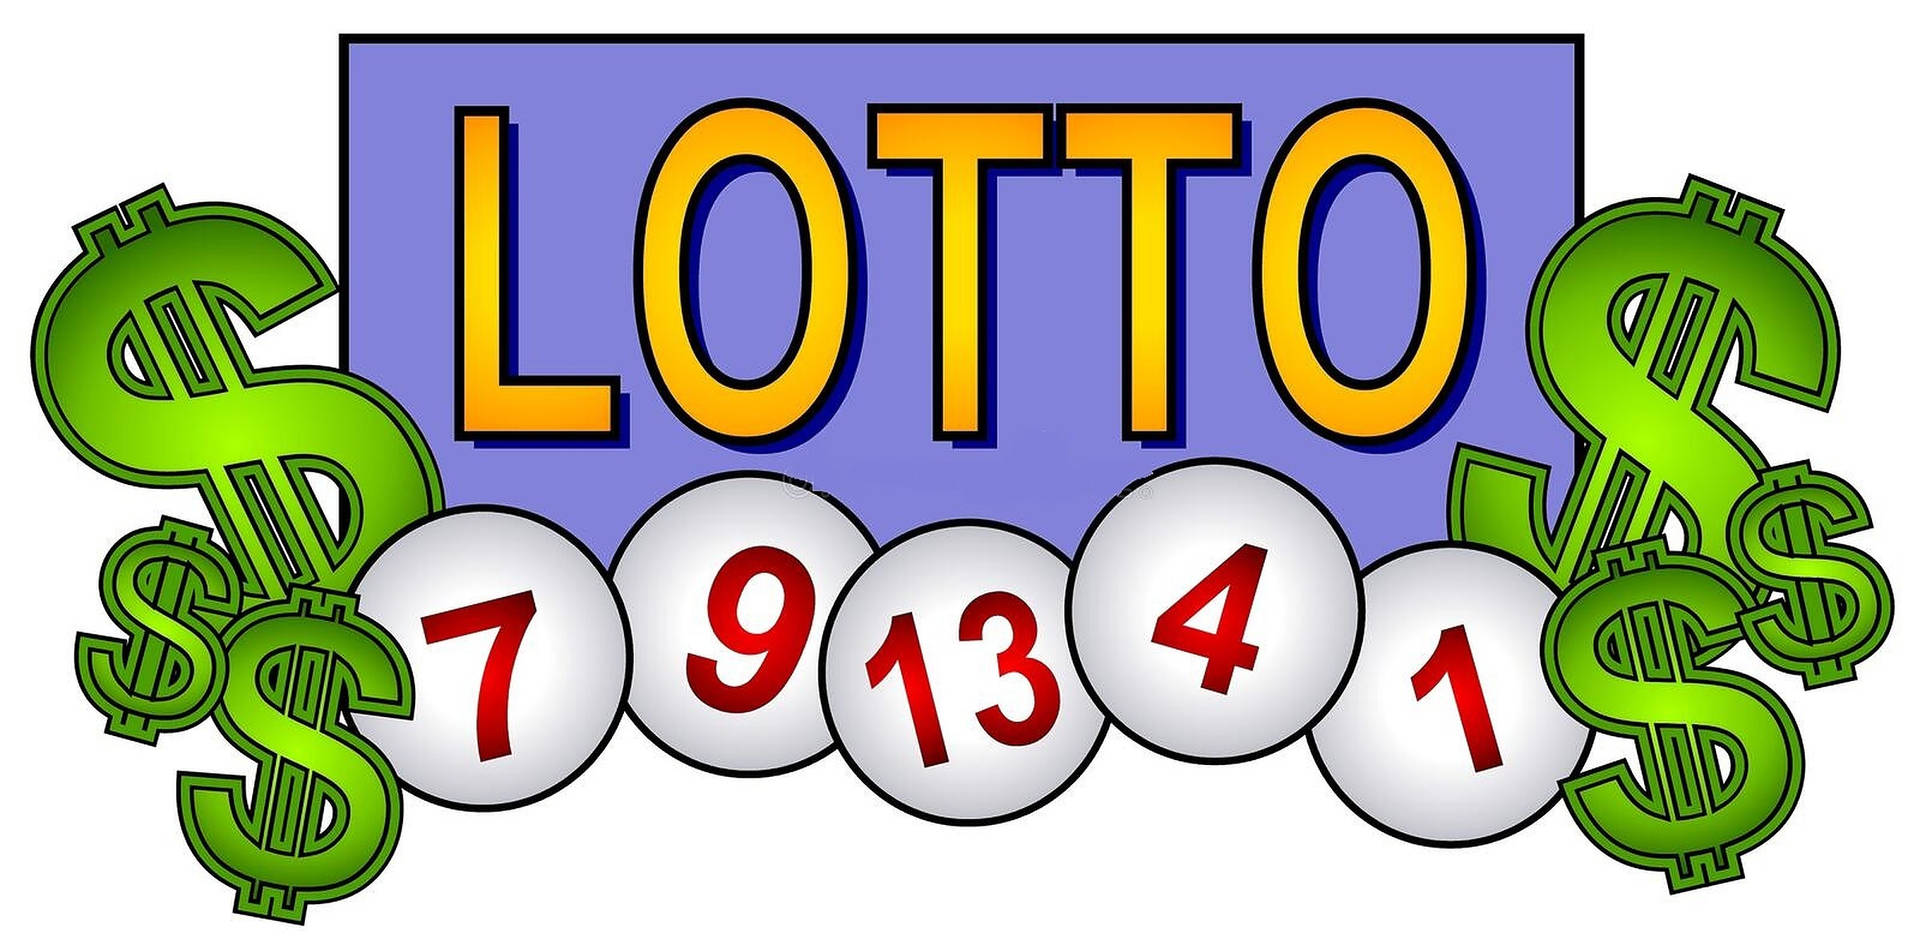 Lottery Numbers And Dollar Signs Background